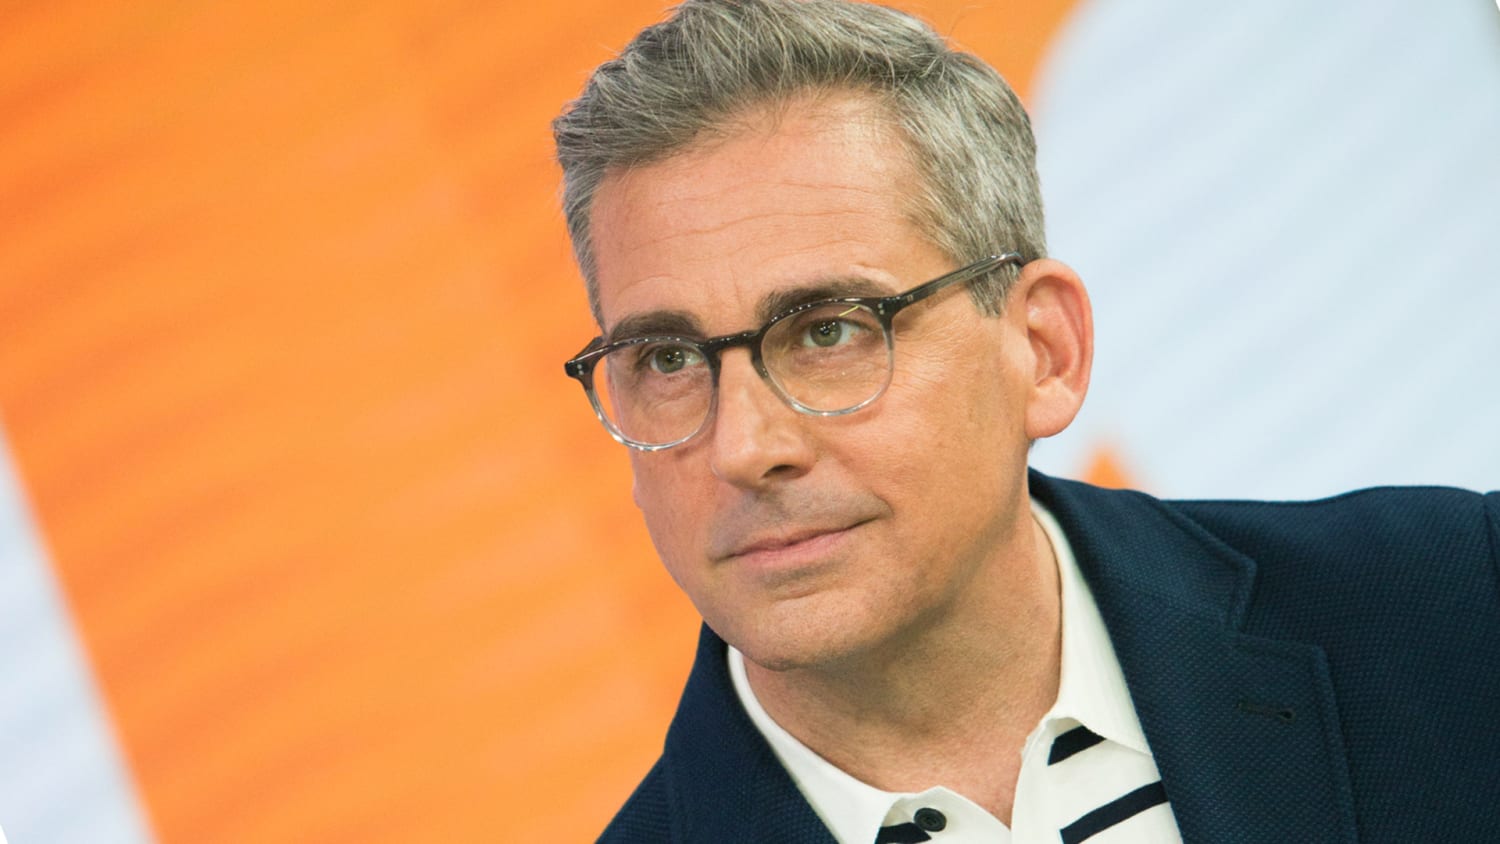 Steve Carell responds to silver-fox attention: 'My eyes are down here!'